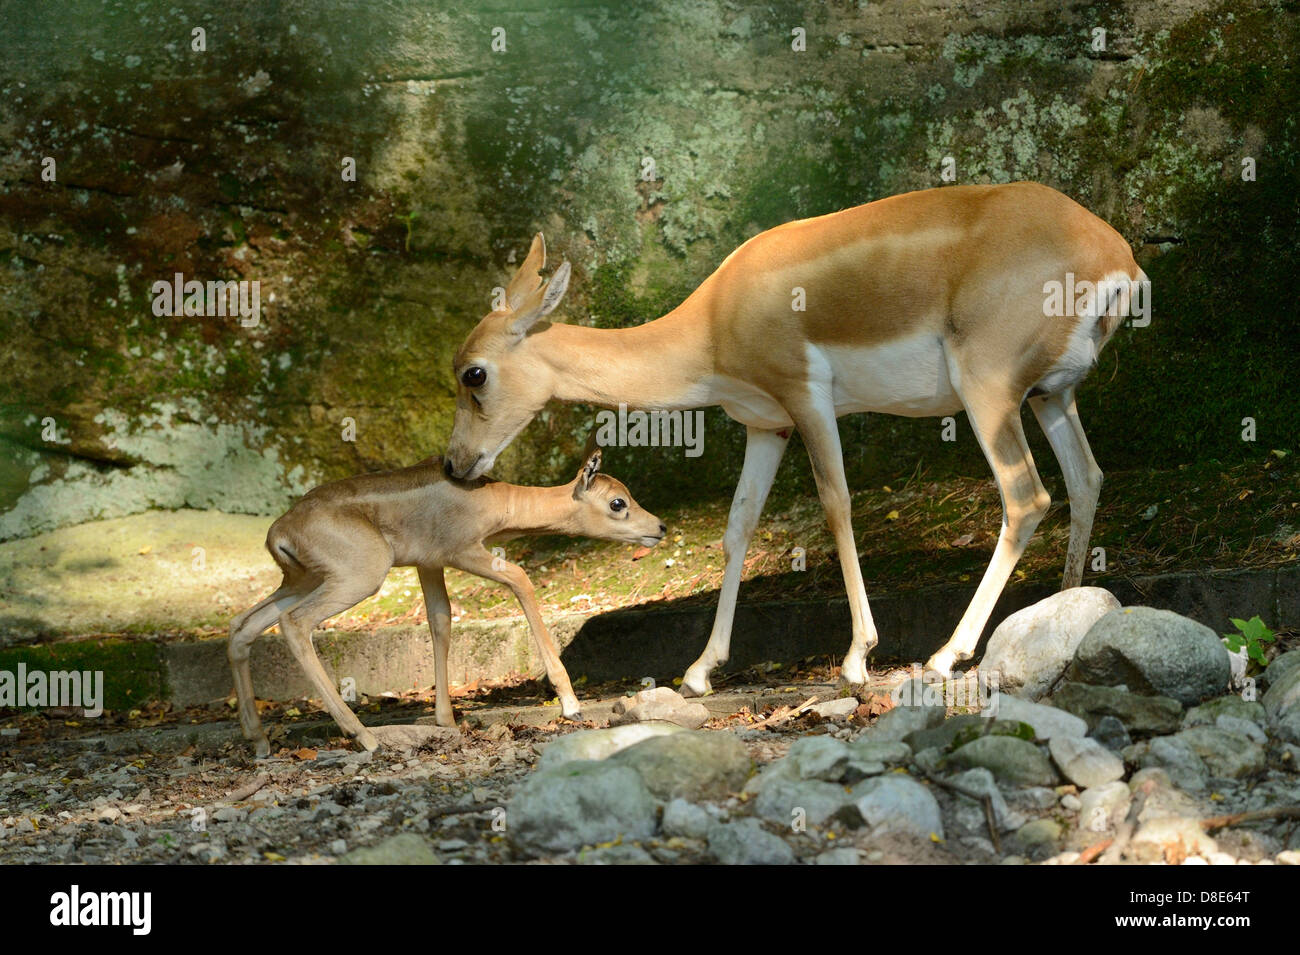 Blackbuck (Antilope cervicapra), young animal with mother Stock Photo